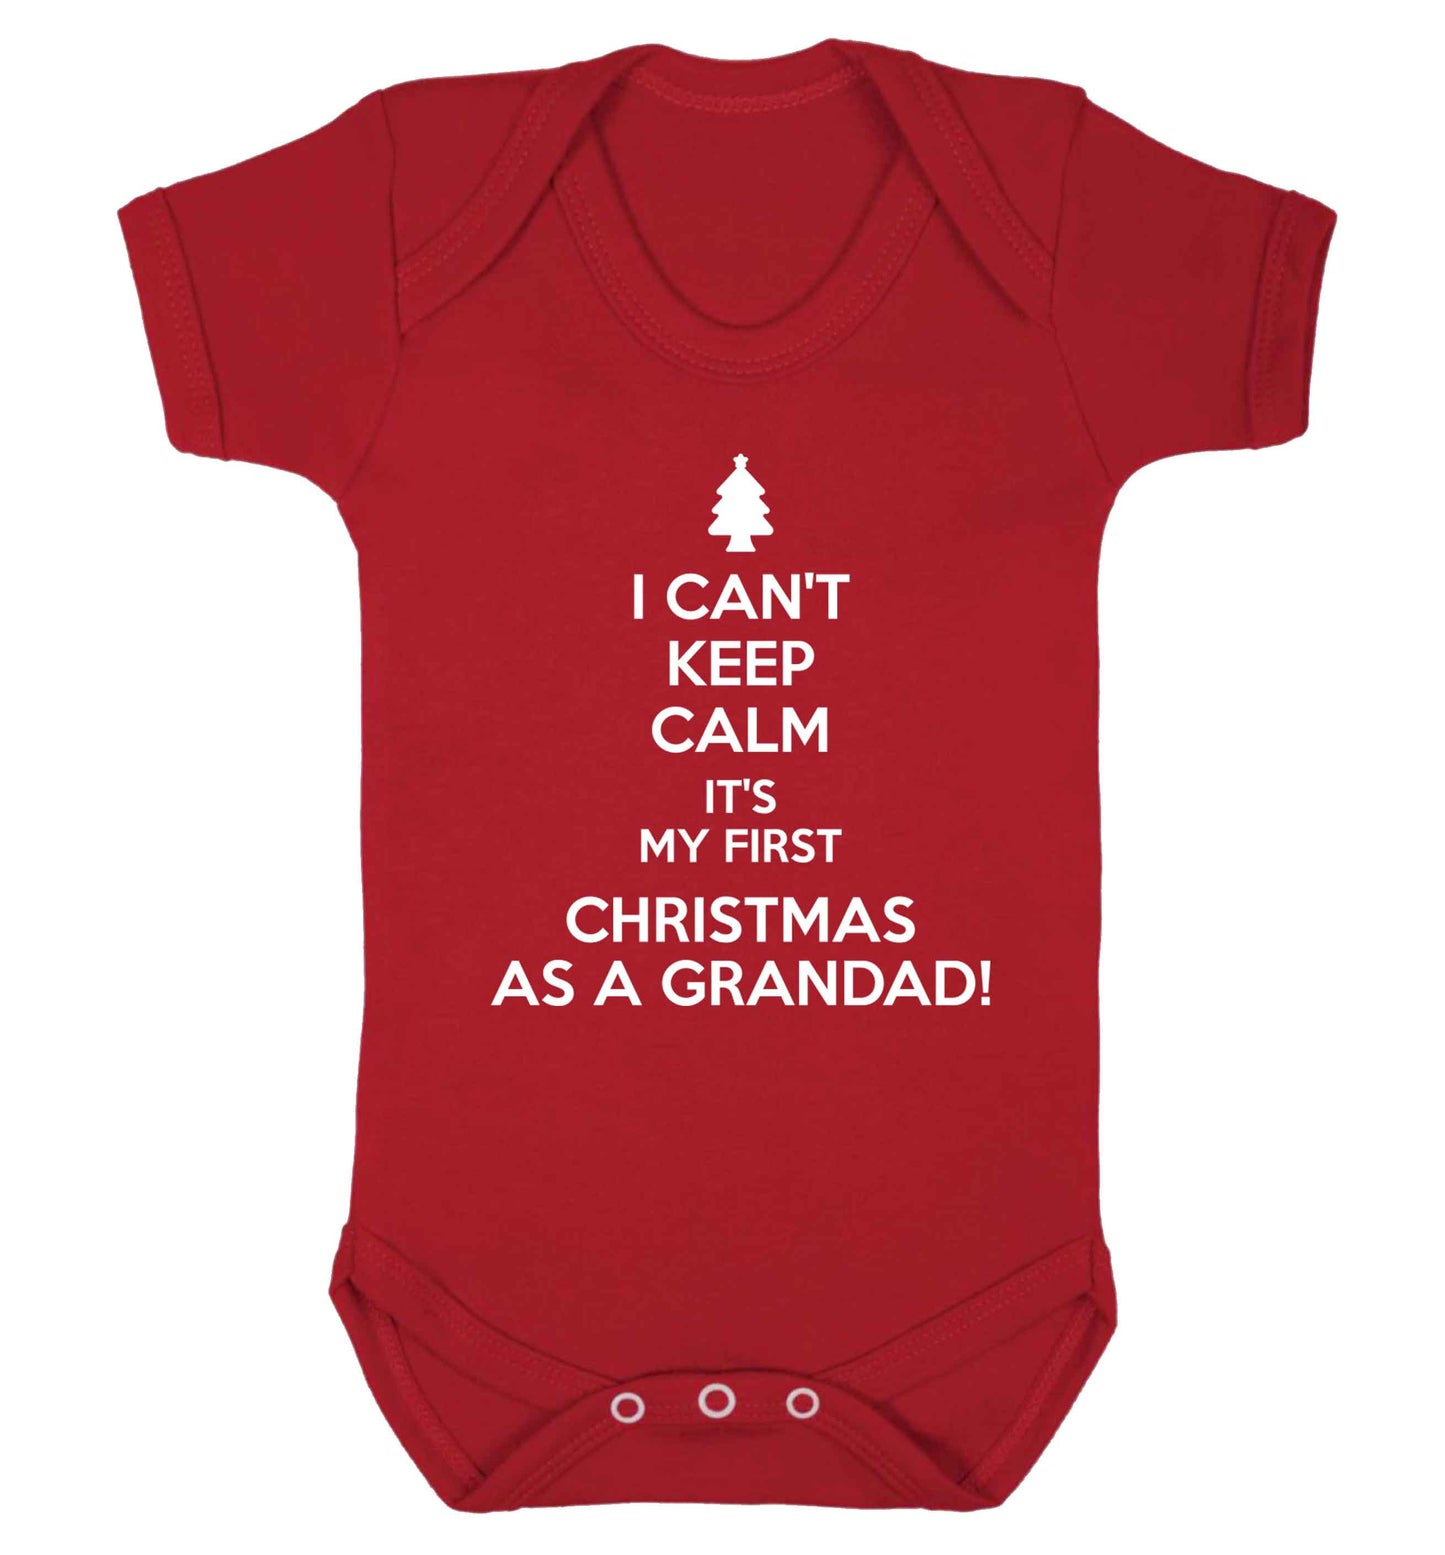 I can't keep calm it's my first Christmas as a grandad! Baby Vest red 18-24 months